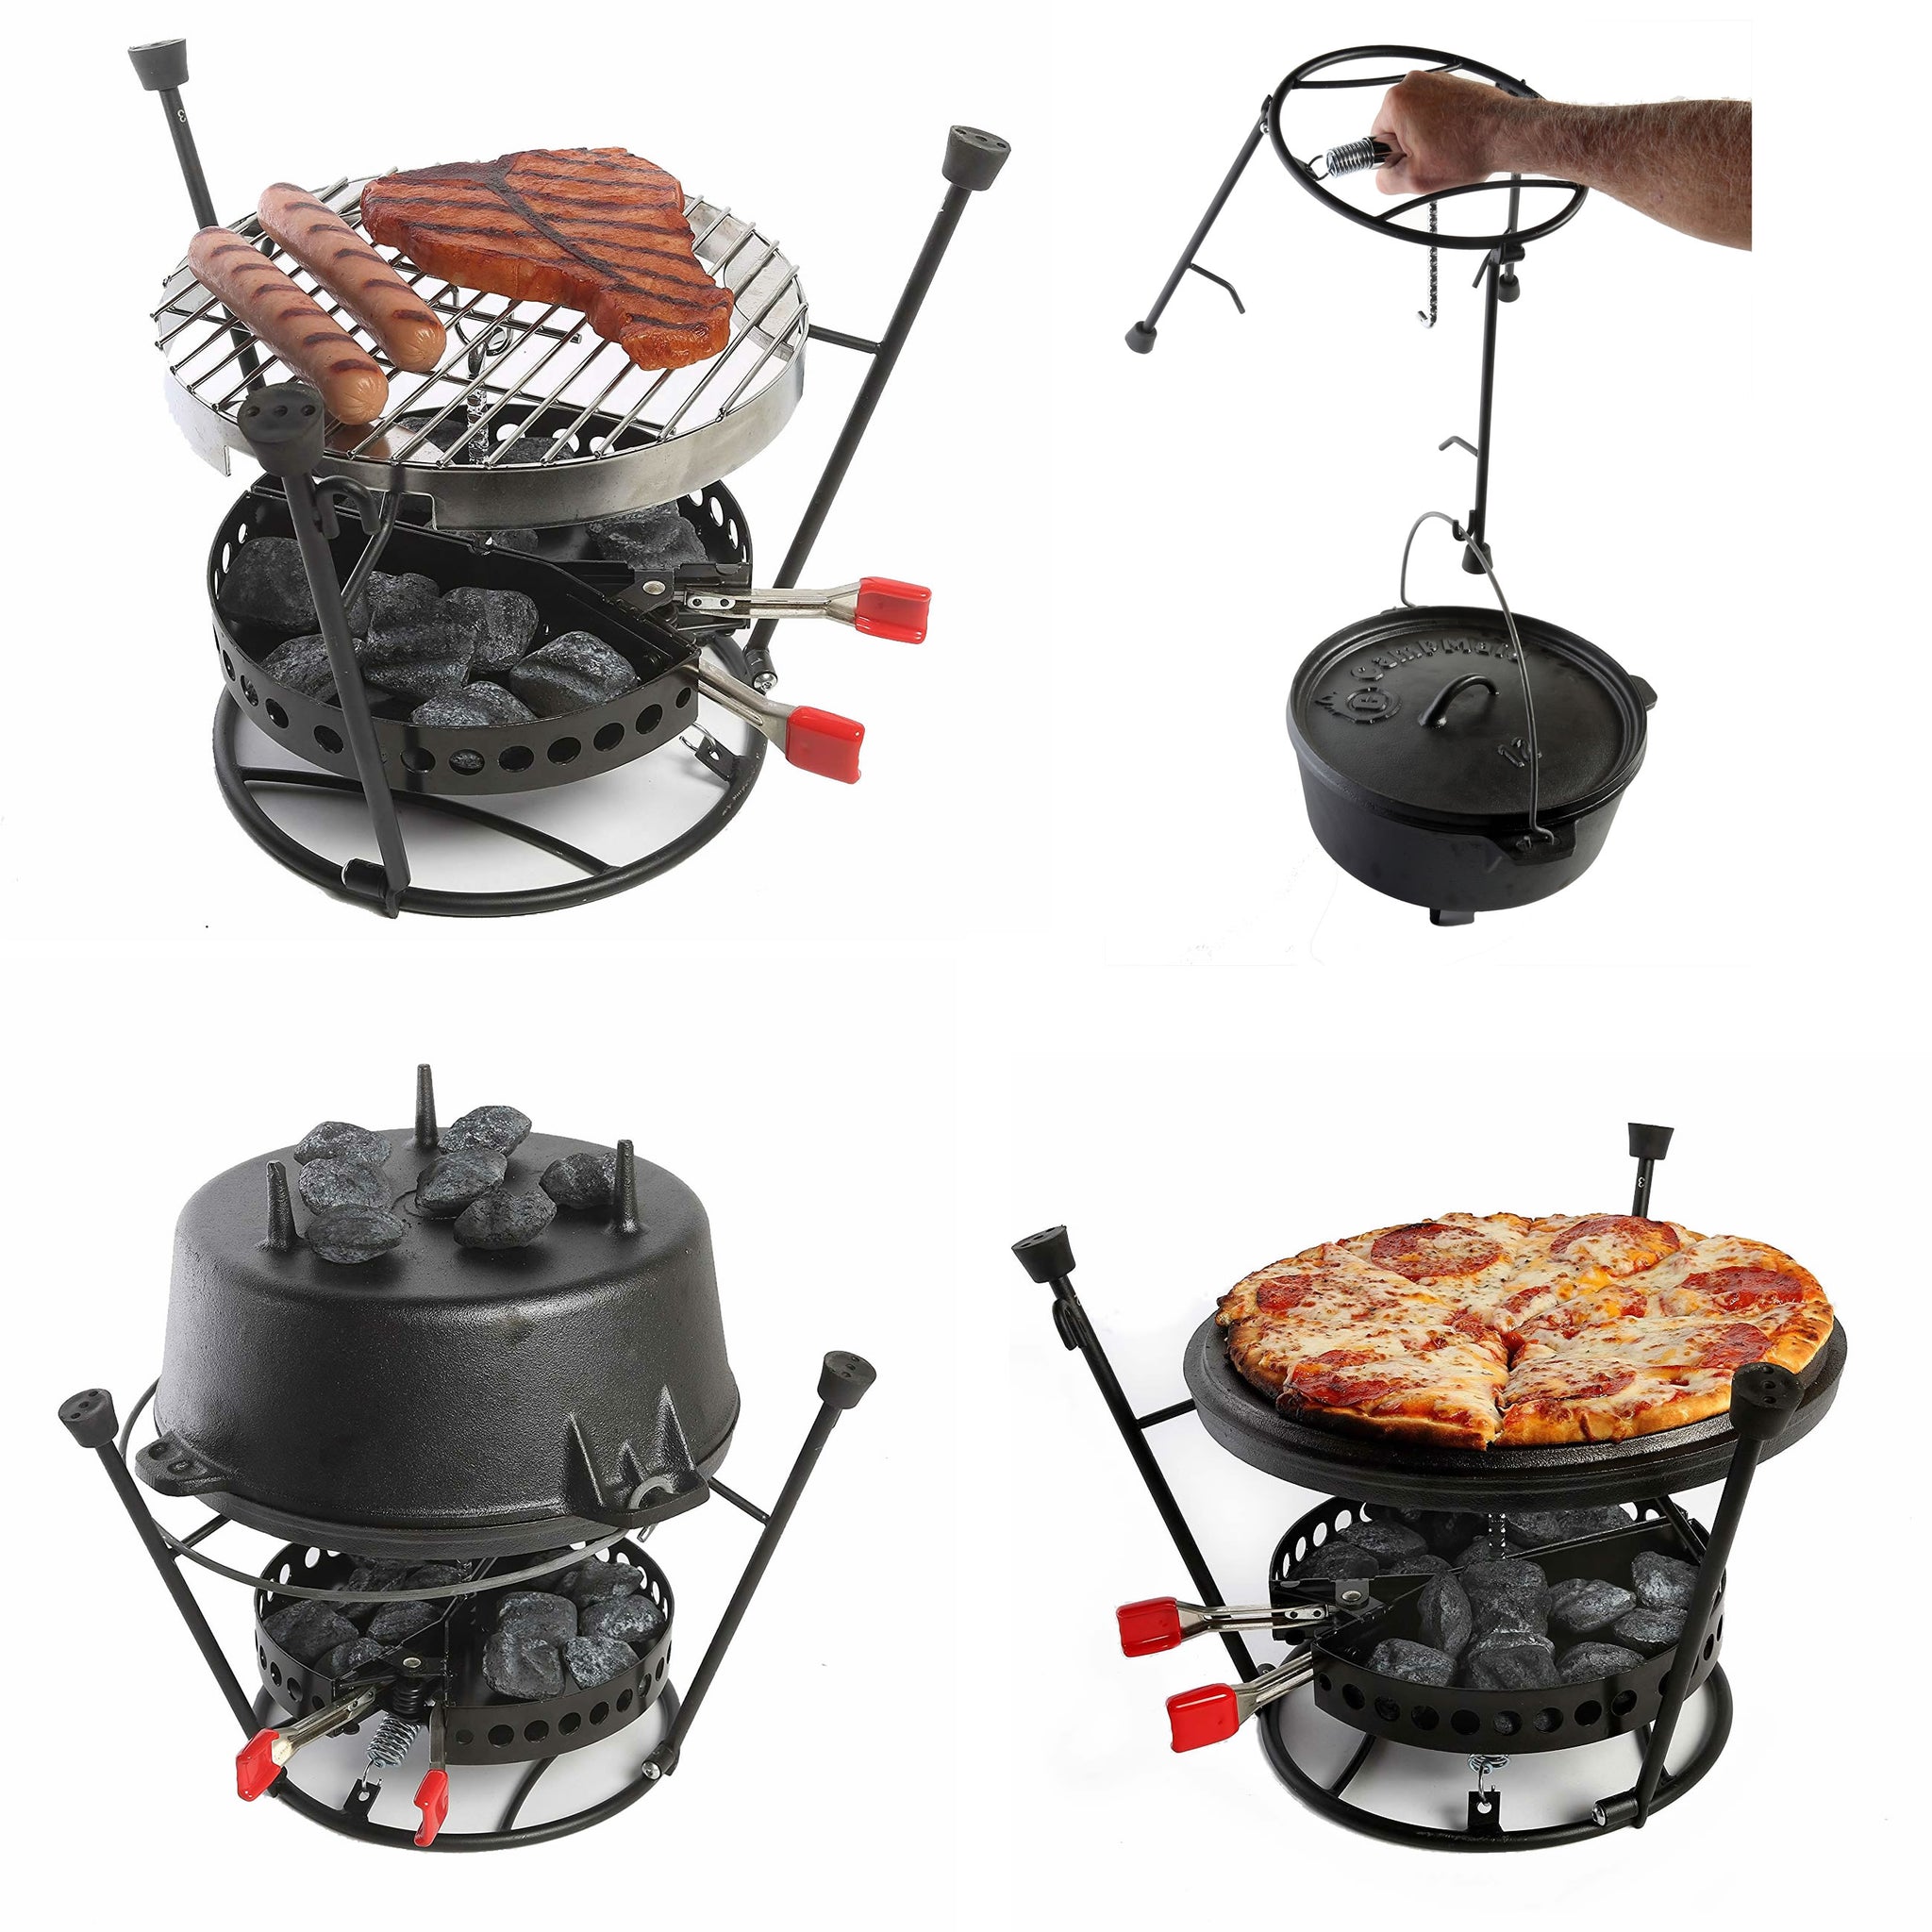 10 Pre-Seasoned 4 Quart Dutch Oven Without Legs - CampMaid